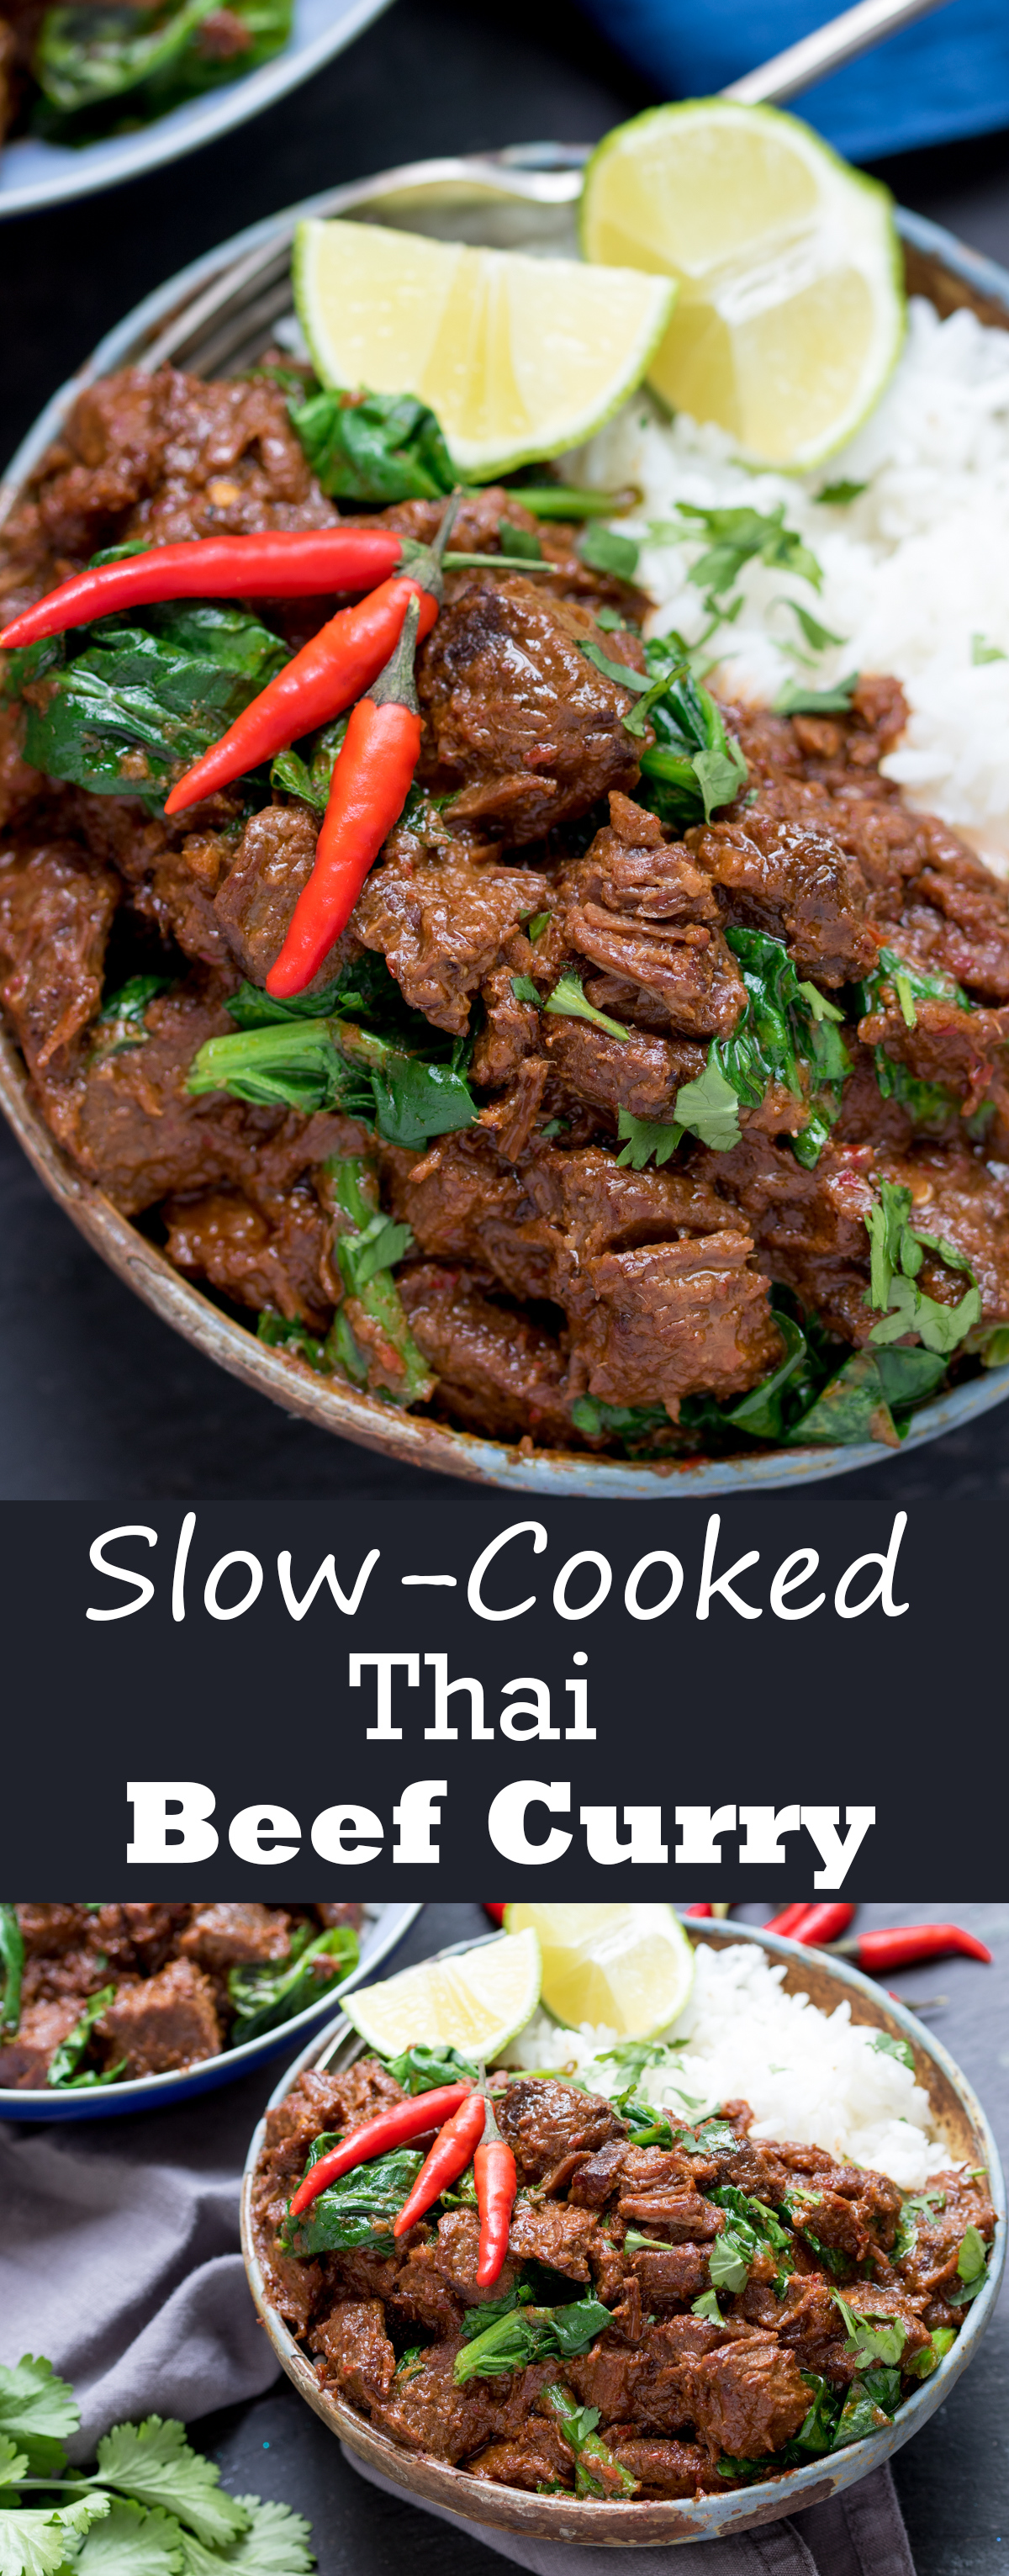 A spicy slow-cooked curry with fall-apart beef. Packed full of flavor!